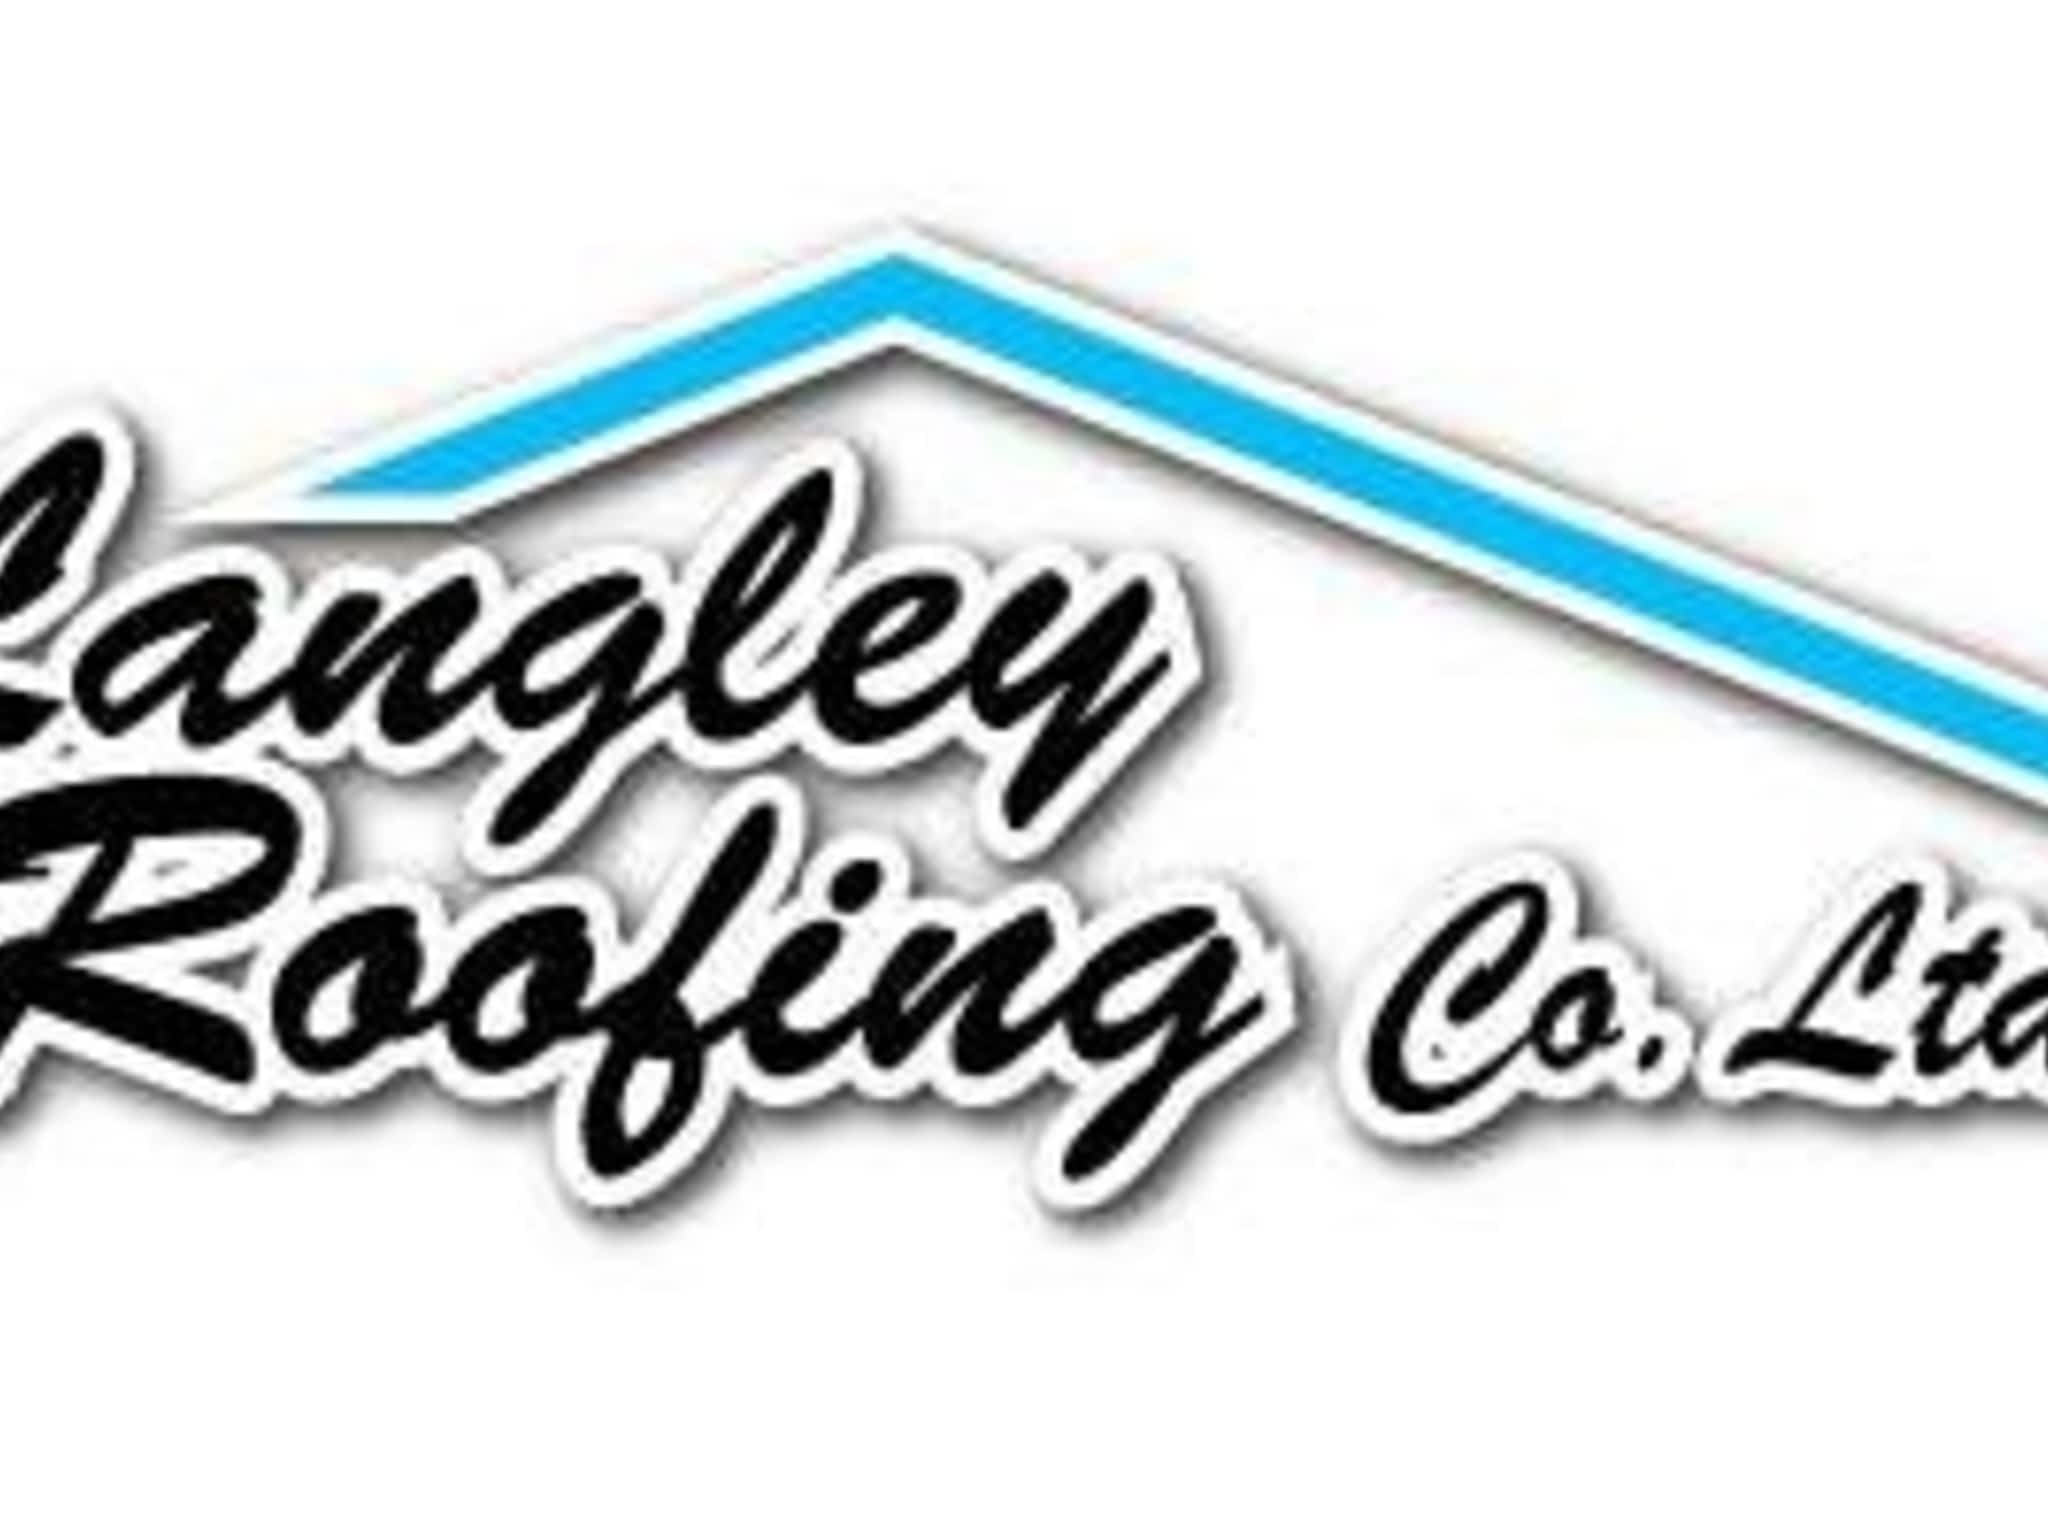 photo Langley Roofing Co Ltd